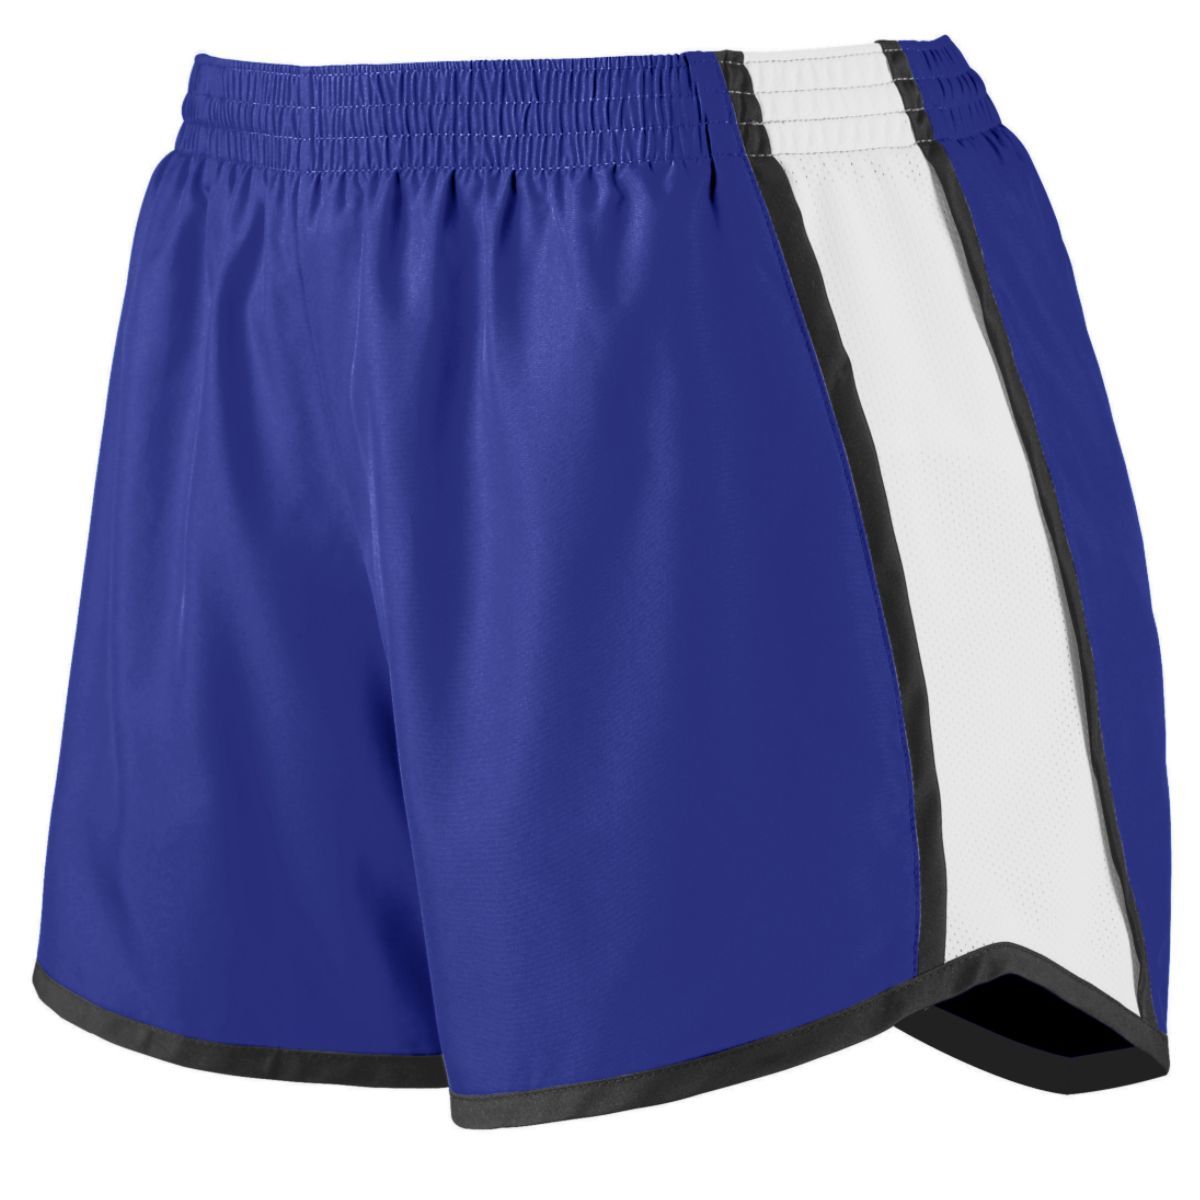 Augusta Sportswear Girls Pulse Team Shorts in Purple/White/Black  -Part of the Girls, Augusta-Products, Volleyball, Girls-Shorts product lines at KanaleyCreations.com